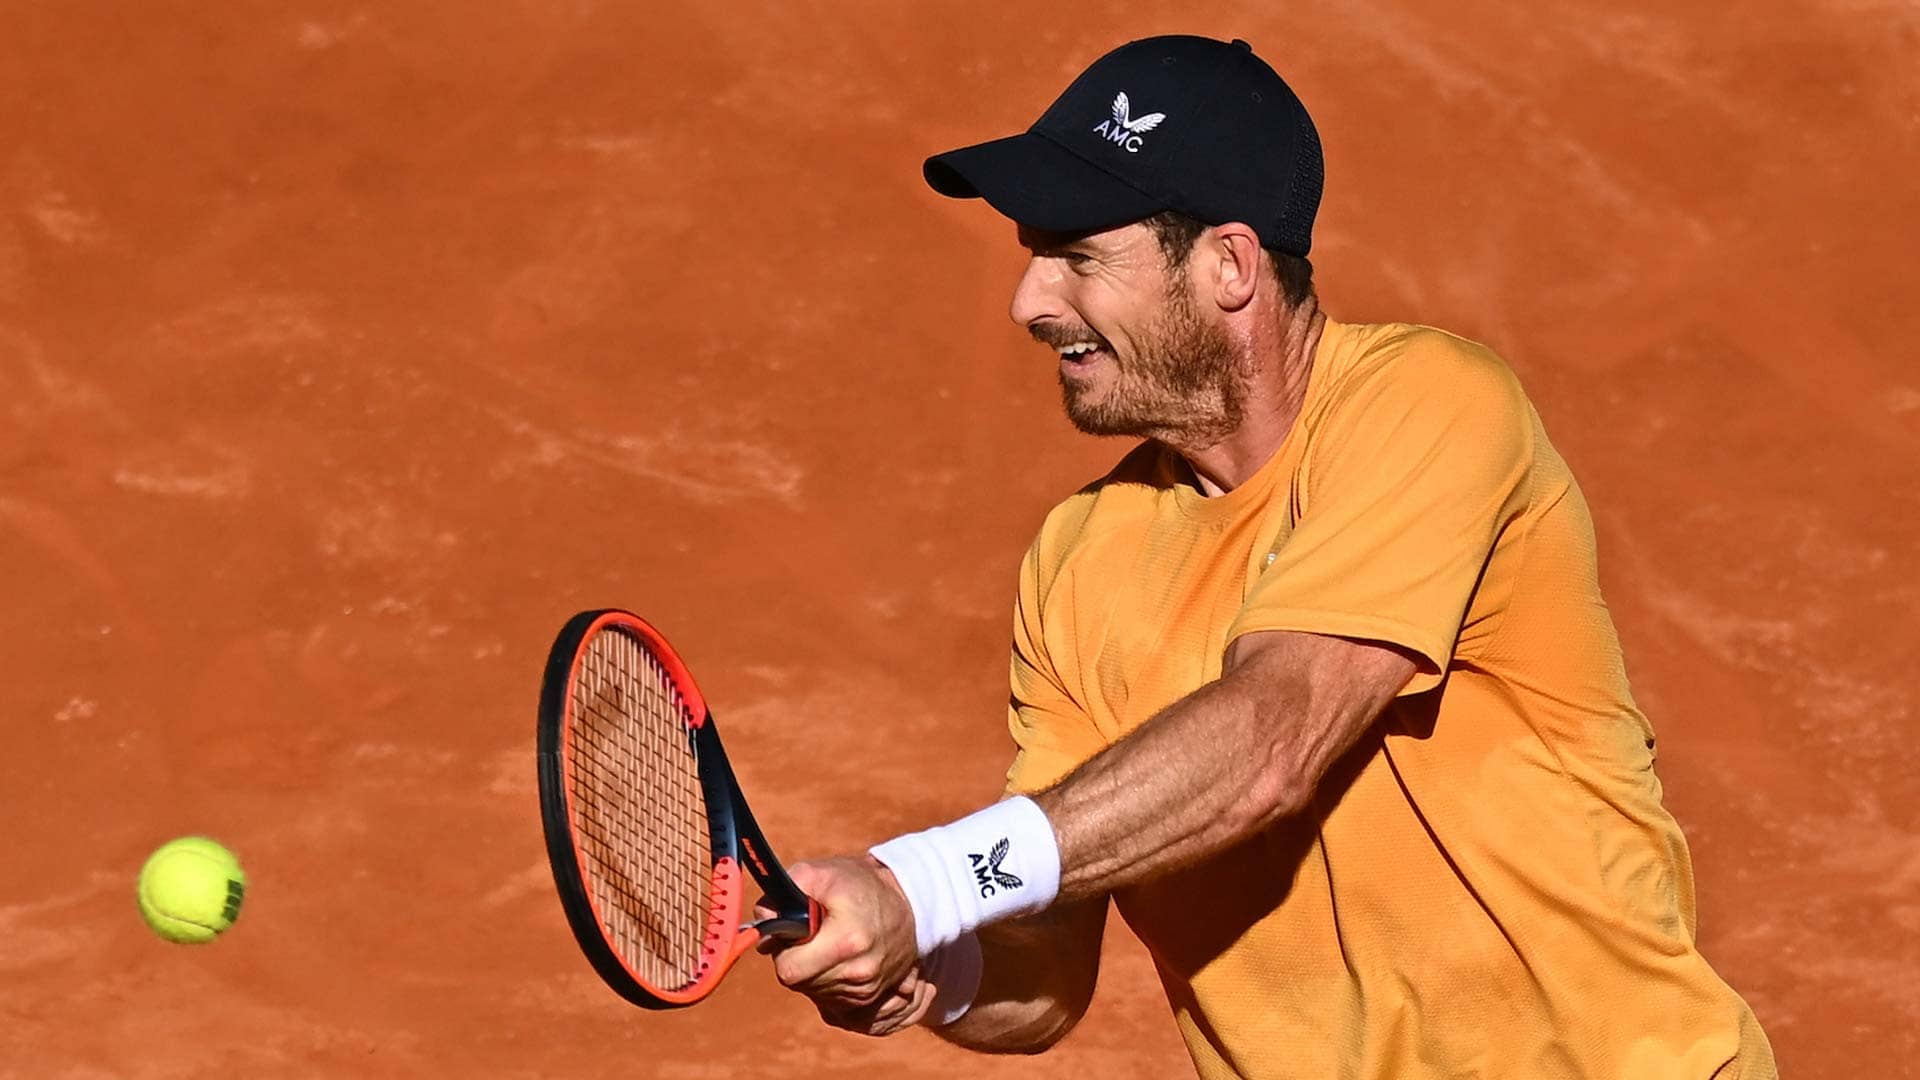 Andy Murray falls to 0-2 during the European clay swing.